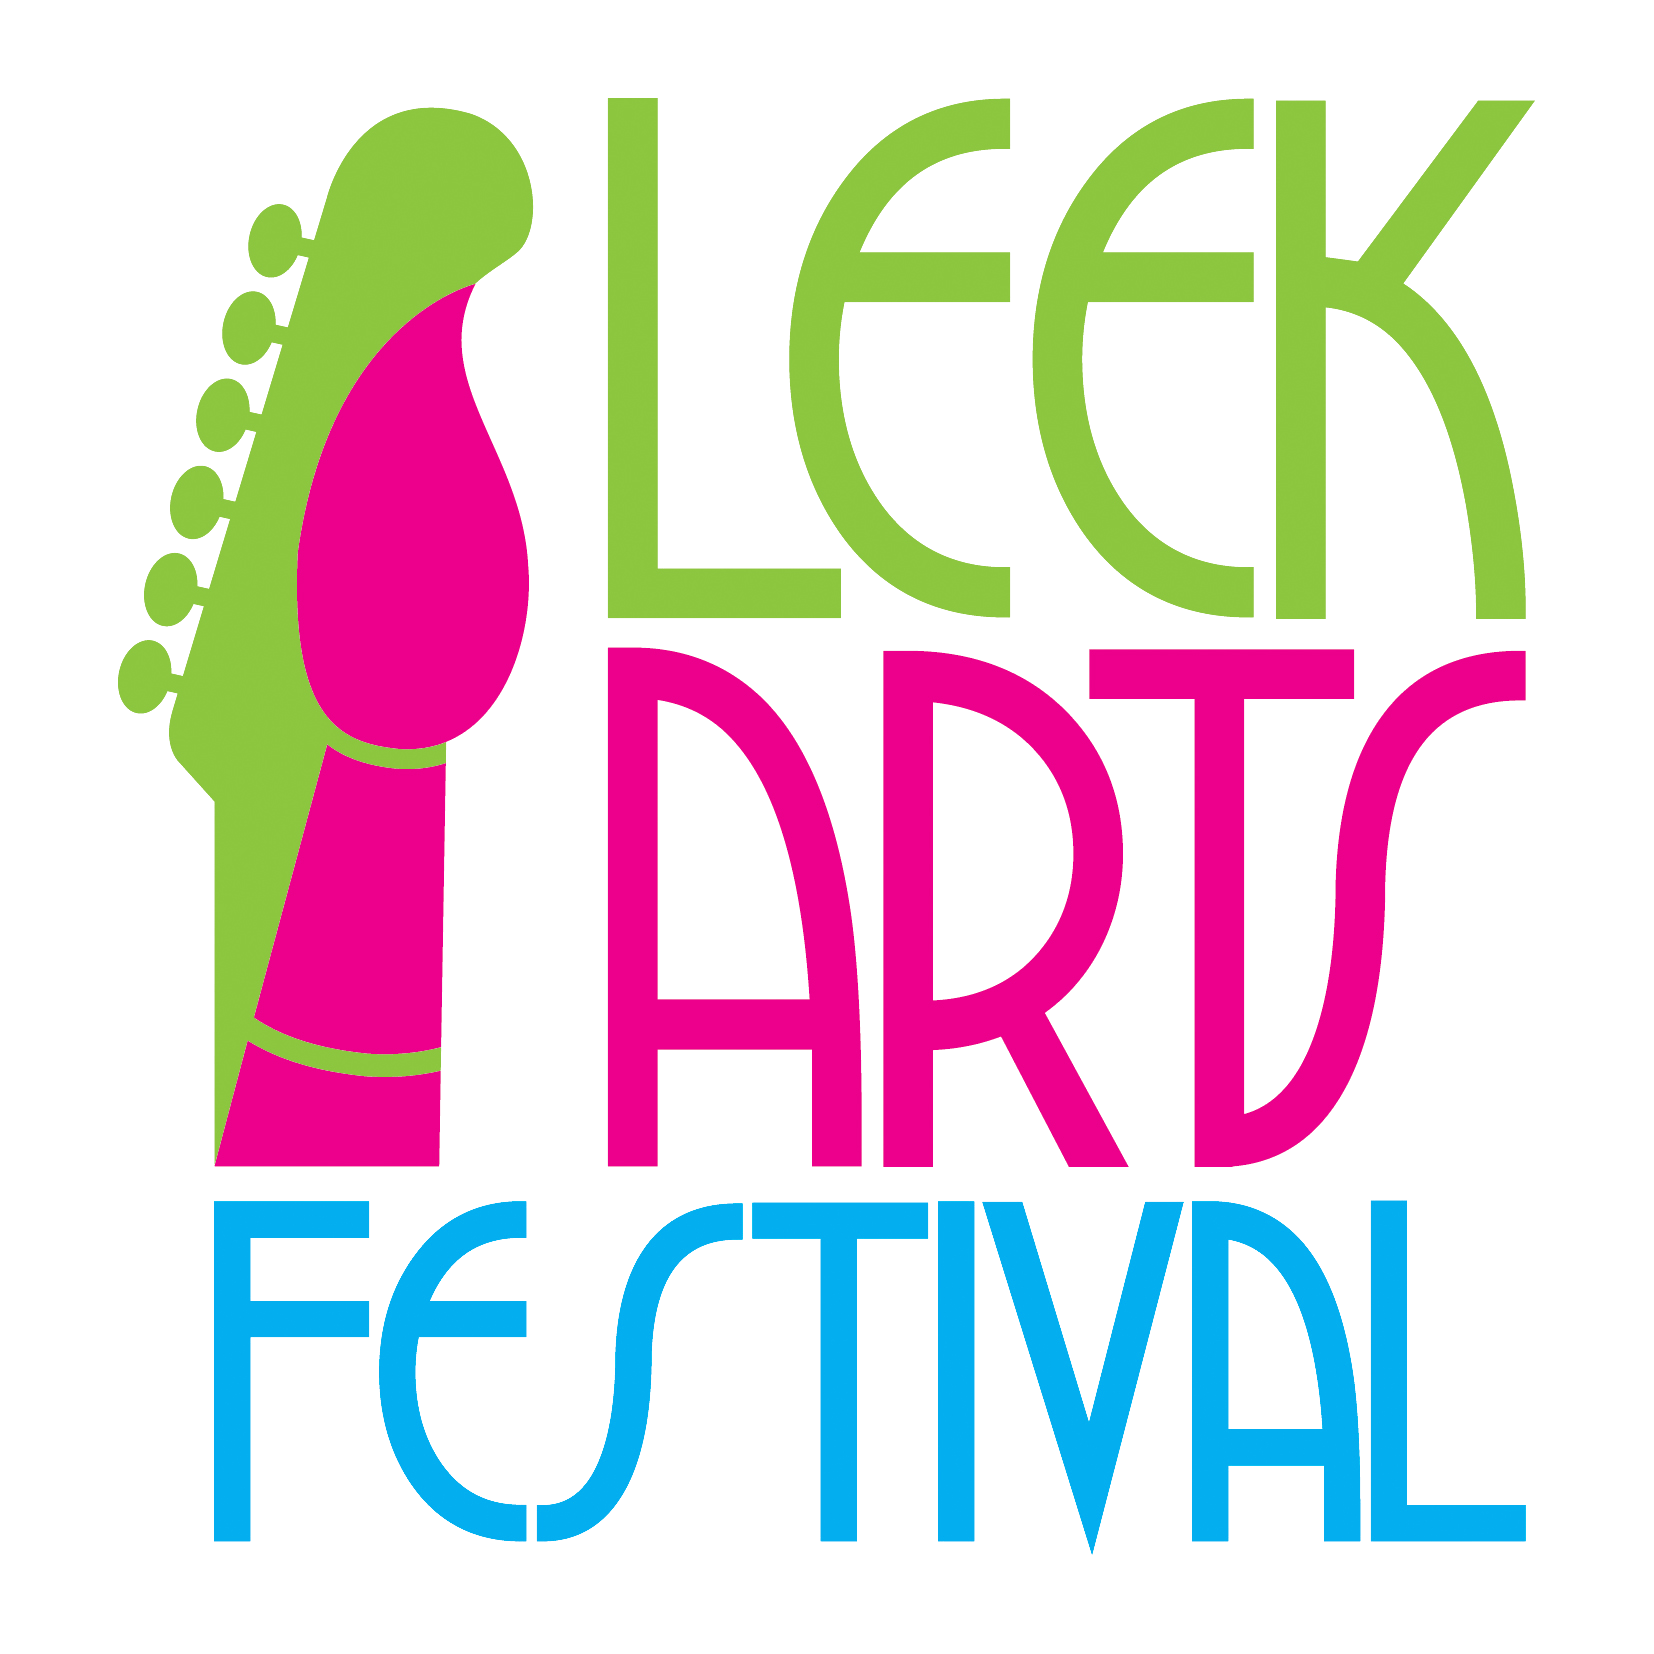 TICKETS for events in Leek Arts Festival 2022 – the first since 2019 (thanks a lot Covid-19!) are now on sale.